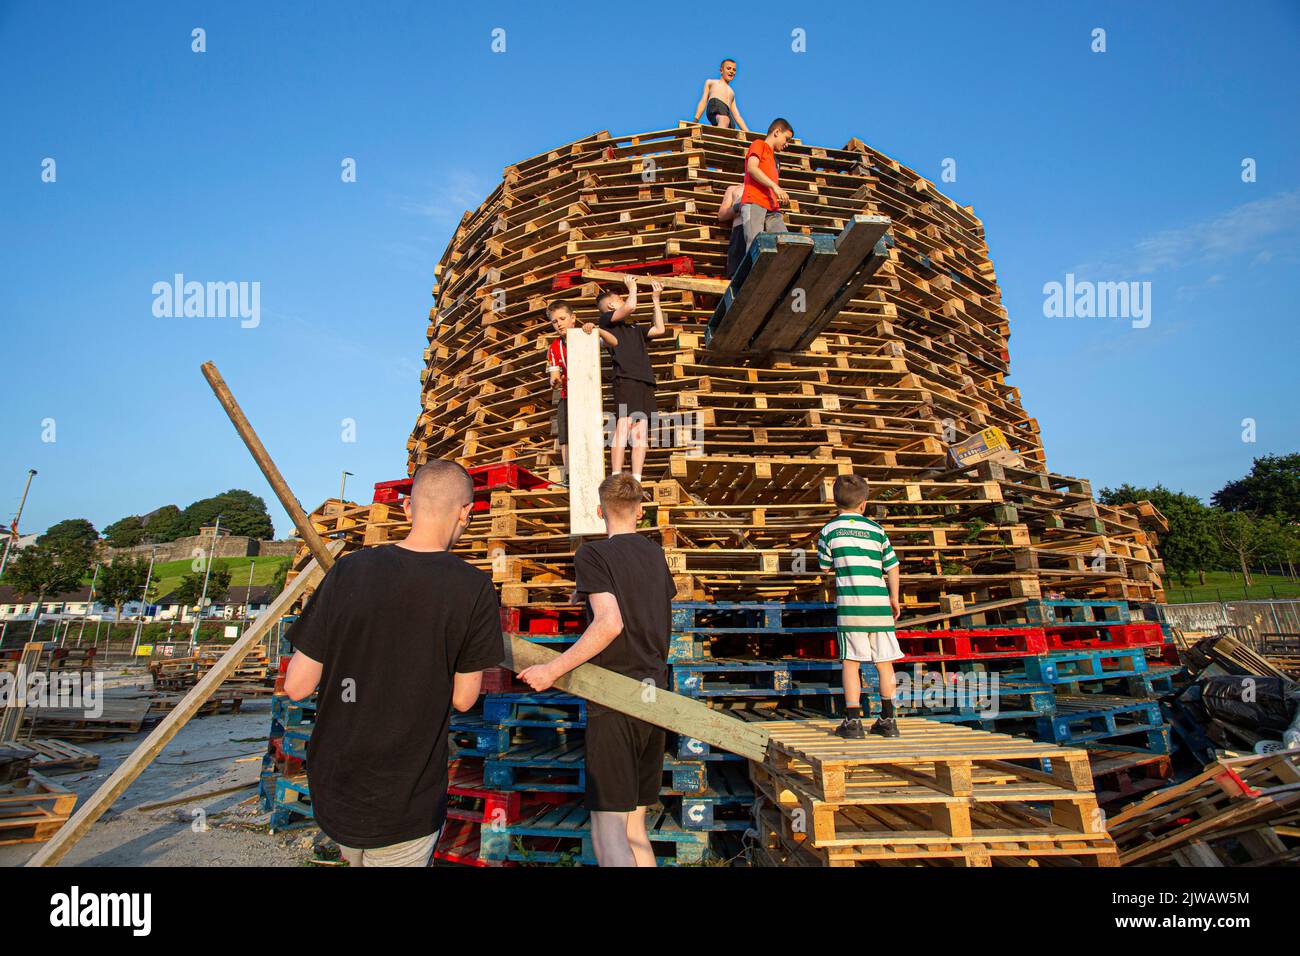 Kids stack pallets over the weekend in preparation for the bonfire marking a Catholic feast day of the Assumption of the Virgin Mary in the Bogside . Stock Photo